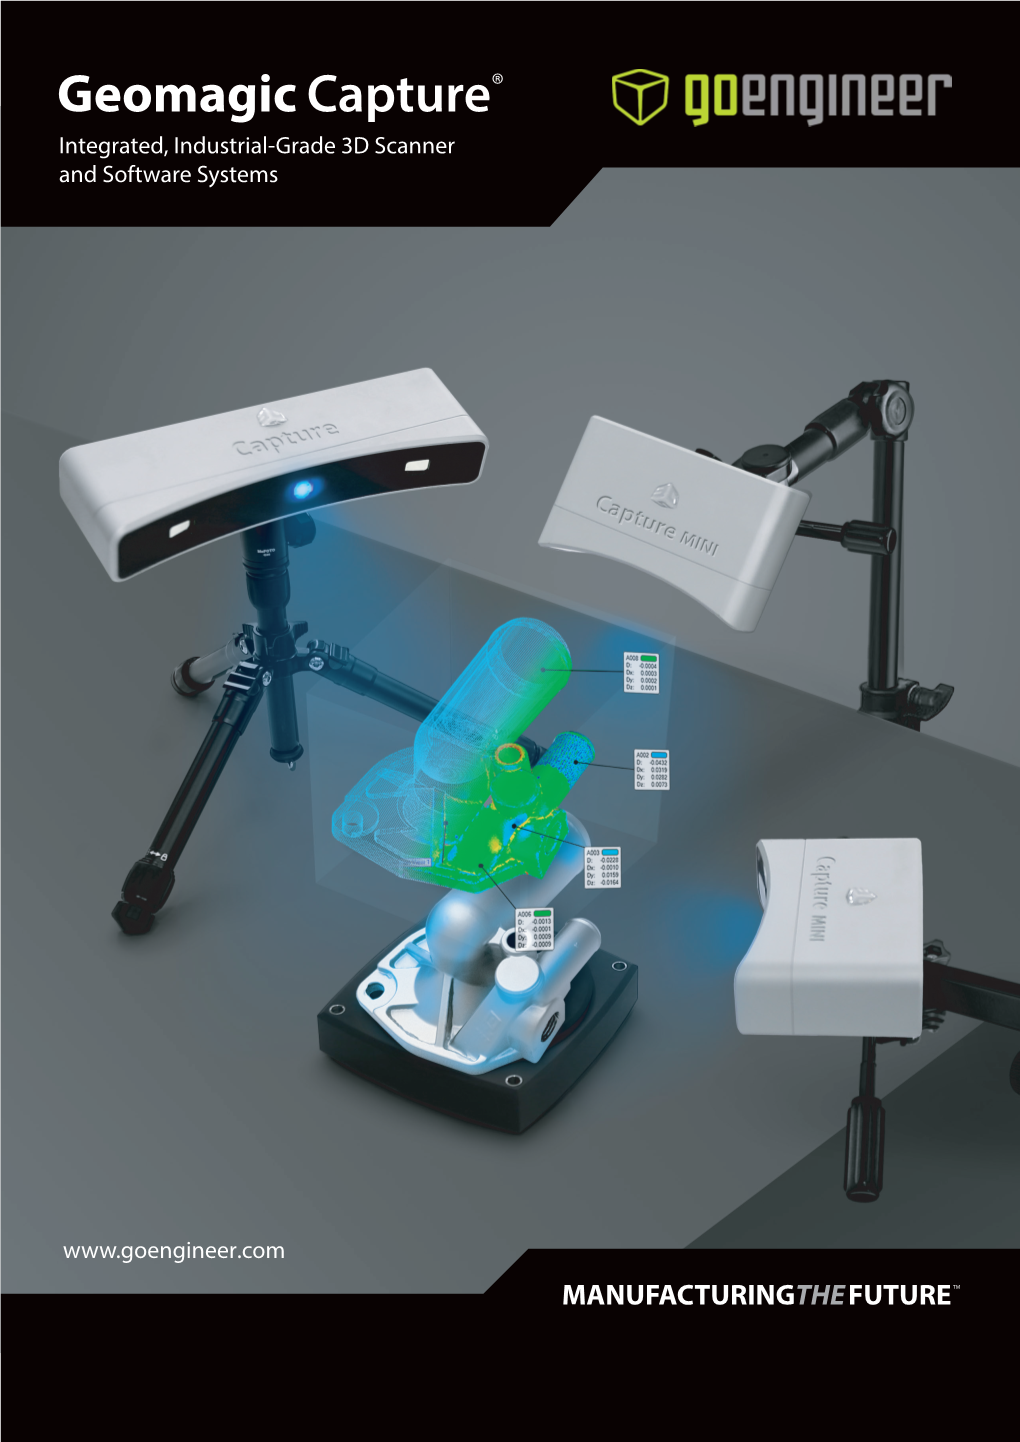 Geomagic Capture Integrated, Industrial-Grade 3D Scanner and Software Systems